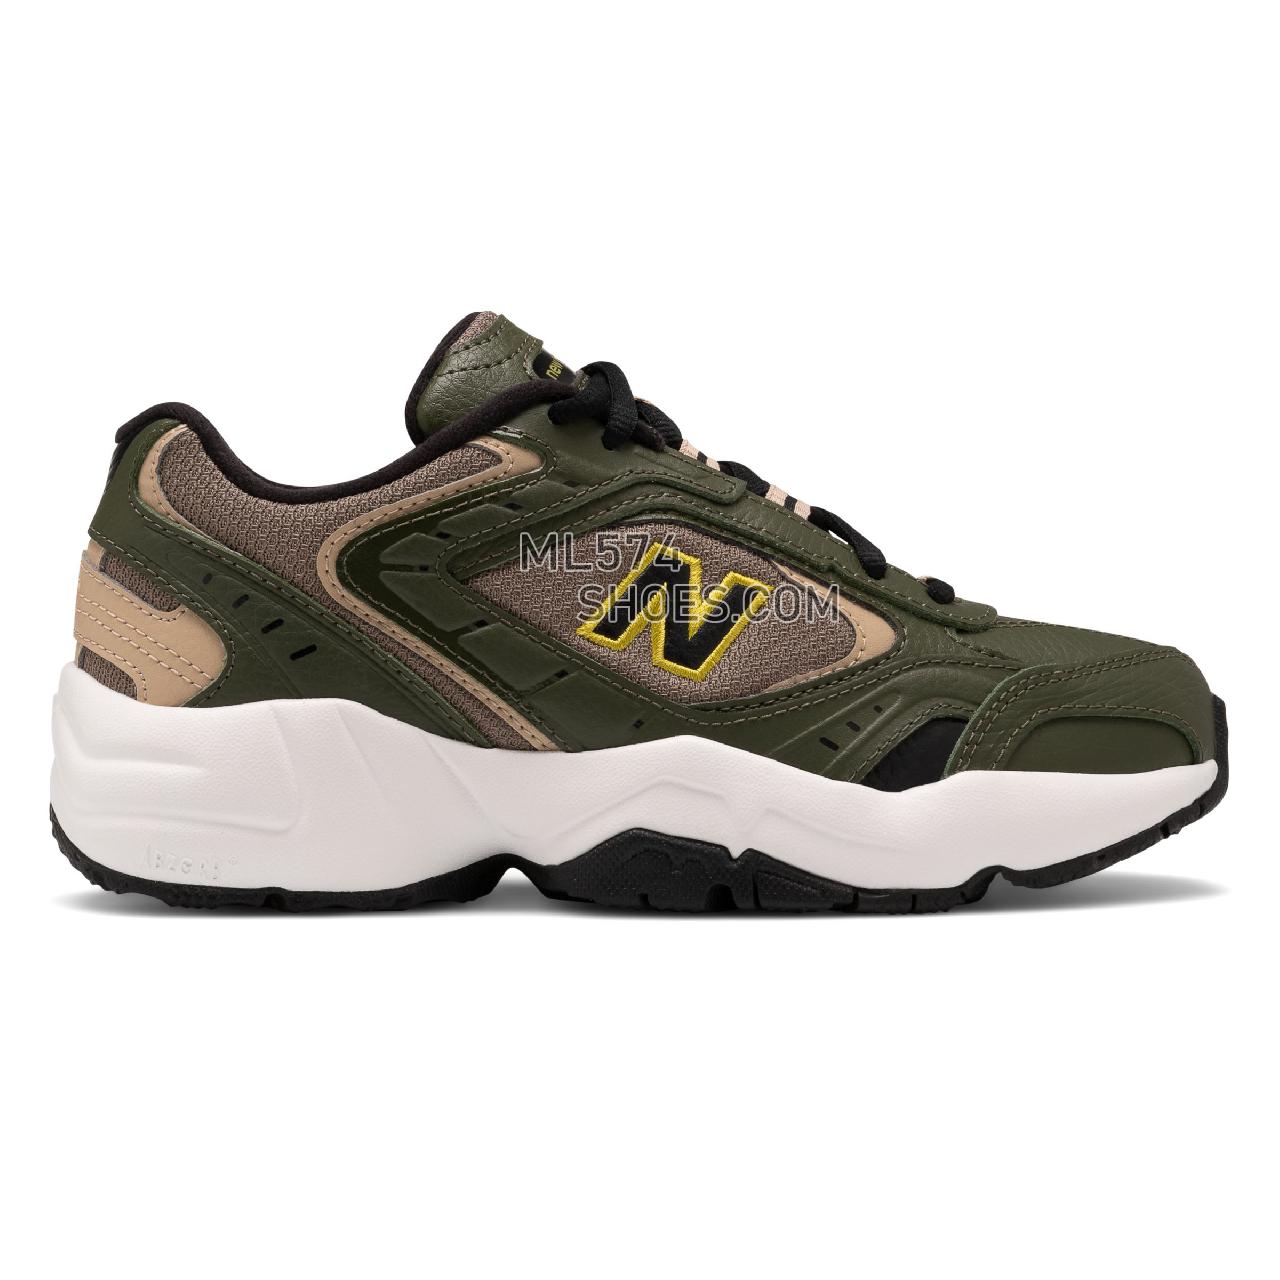 New Balance 452 - Women's 452 Training - Dark Covert Green with Incense and Black - WX452SO